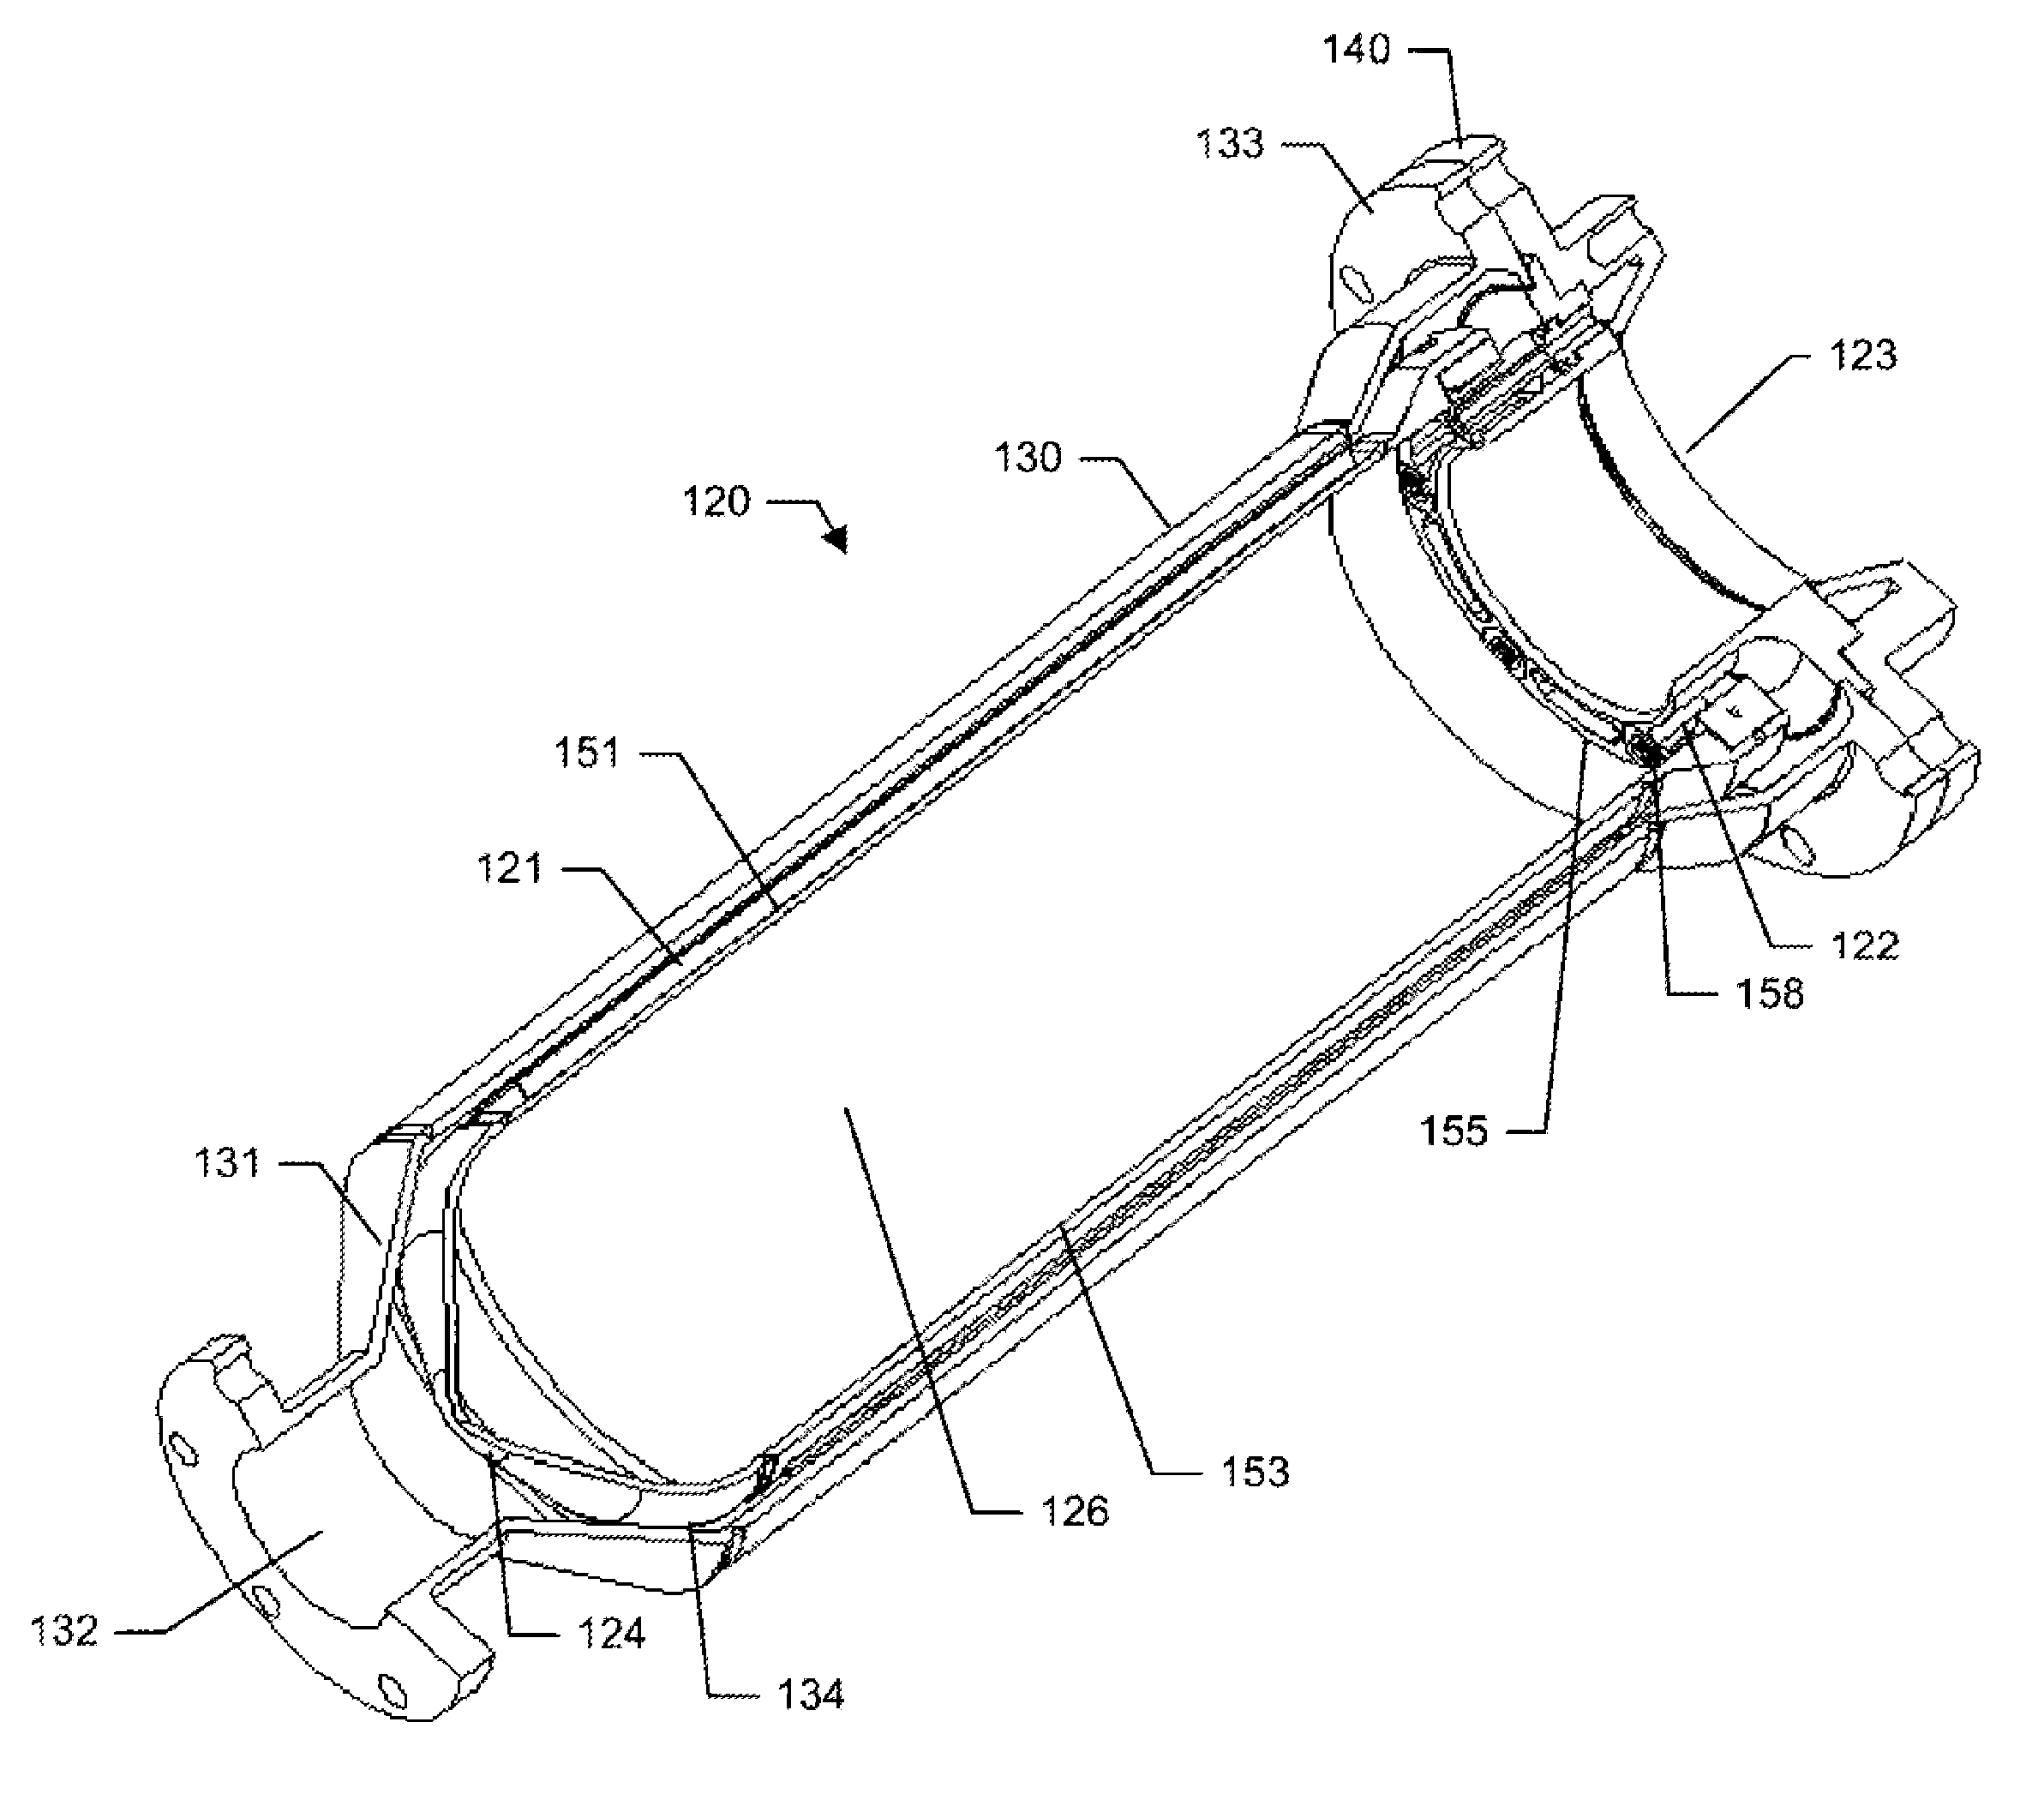 Stagnation point reverse flow combustor for a combustion system